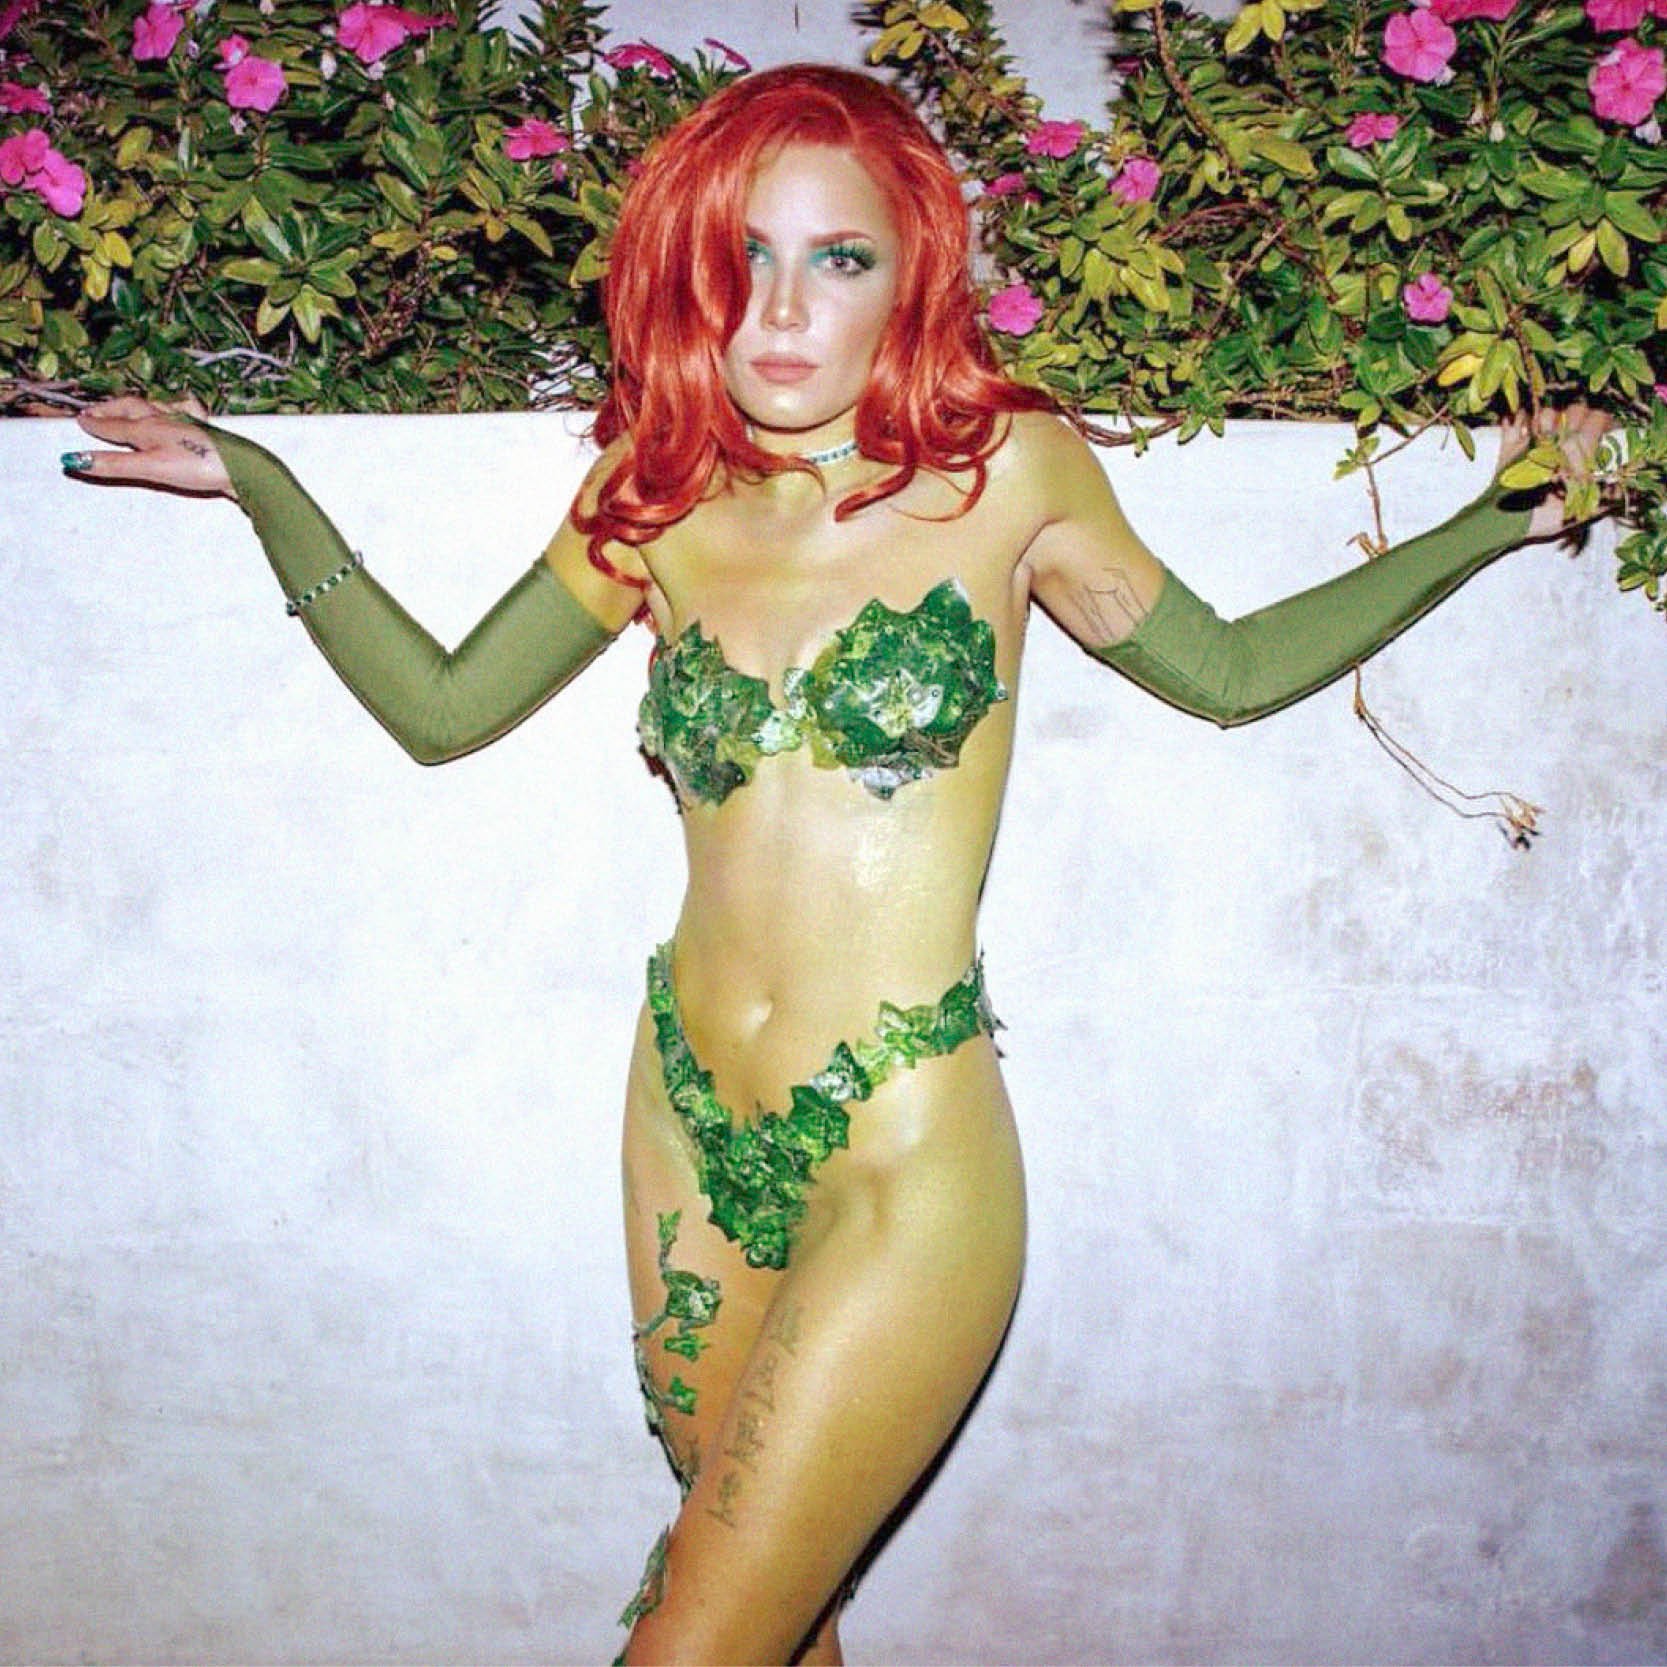 Halsey Sexy In Ivy Costume TheFappeningPro 2 - Halsey Sexy In Ivy Costume At Halloween (5 Photos)